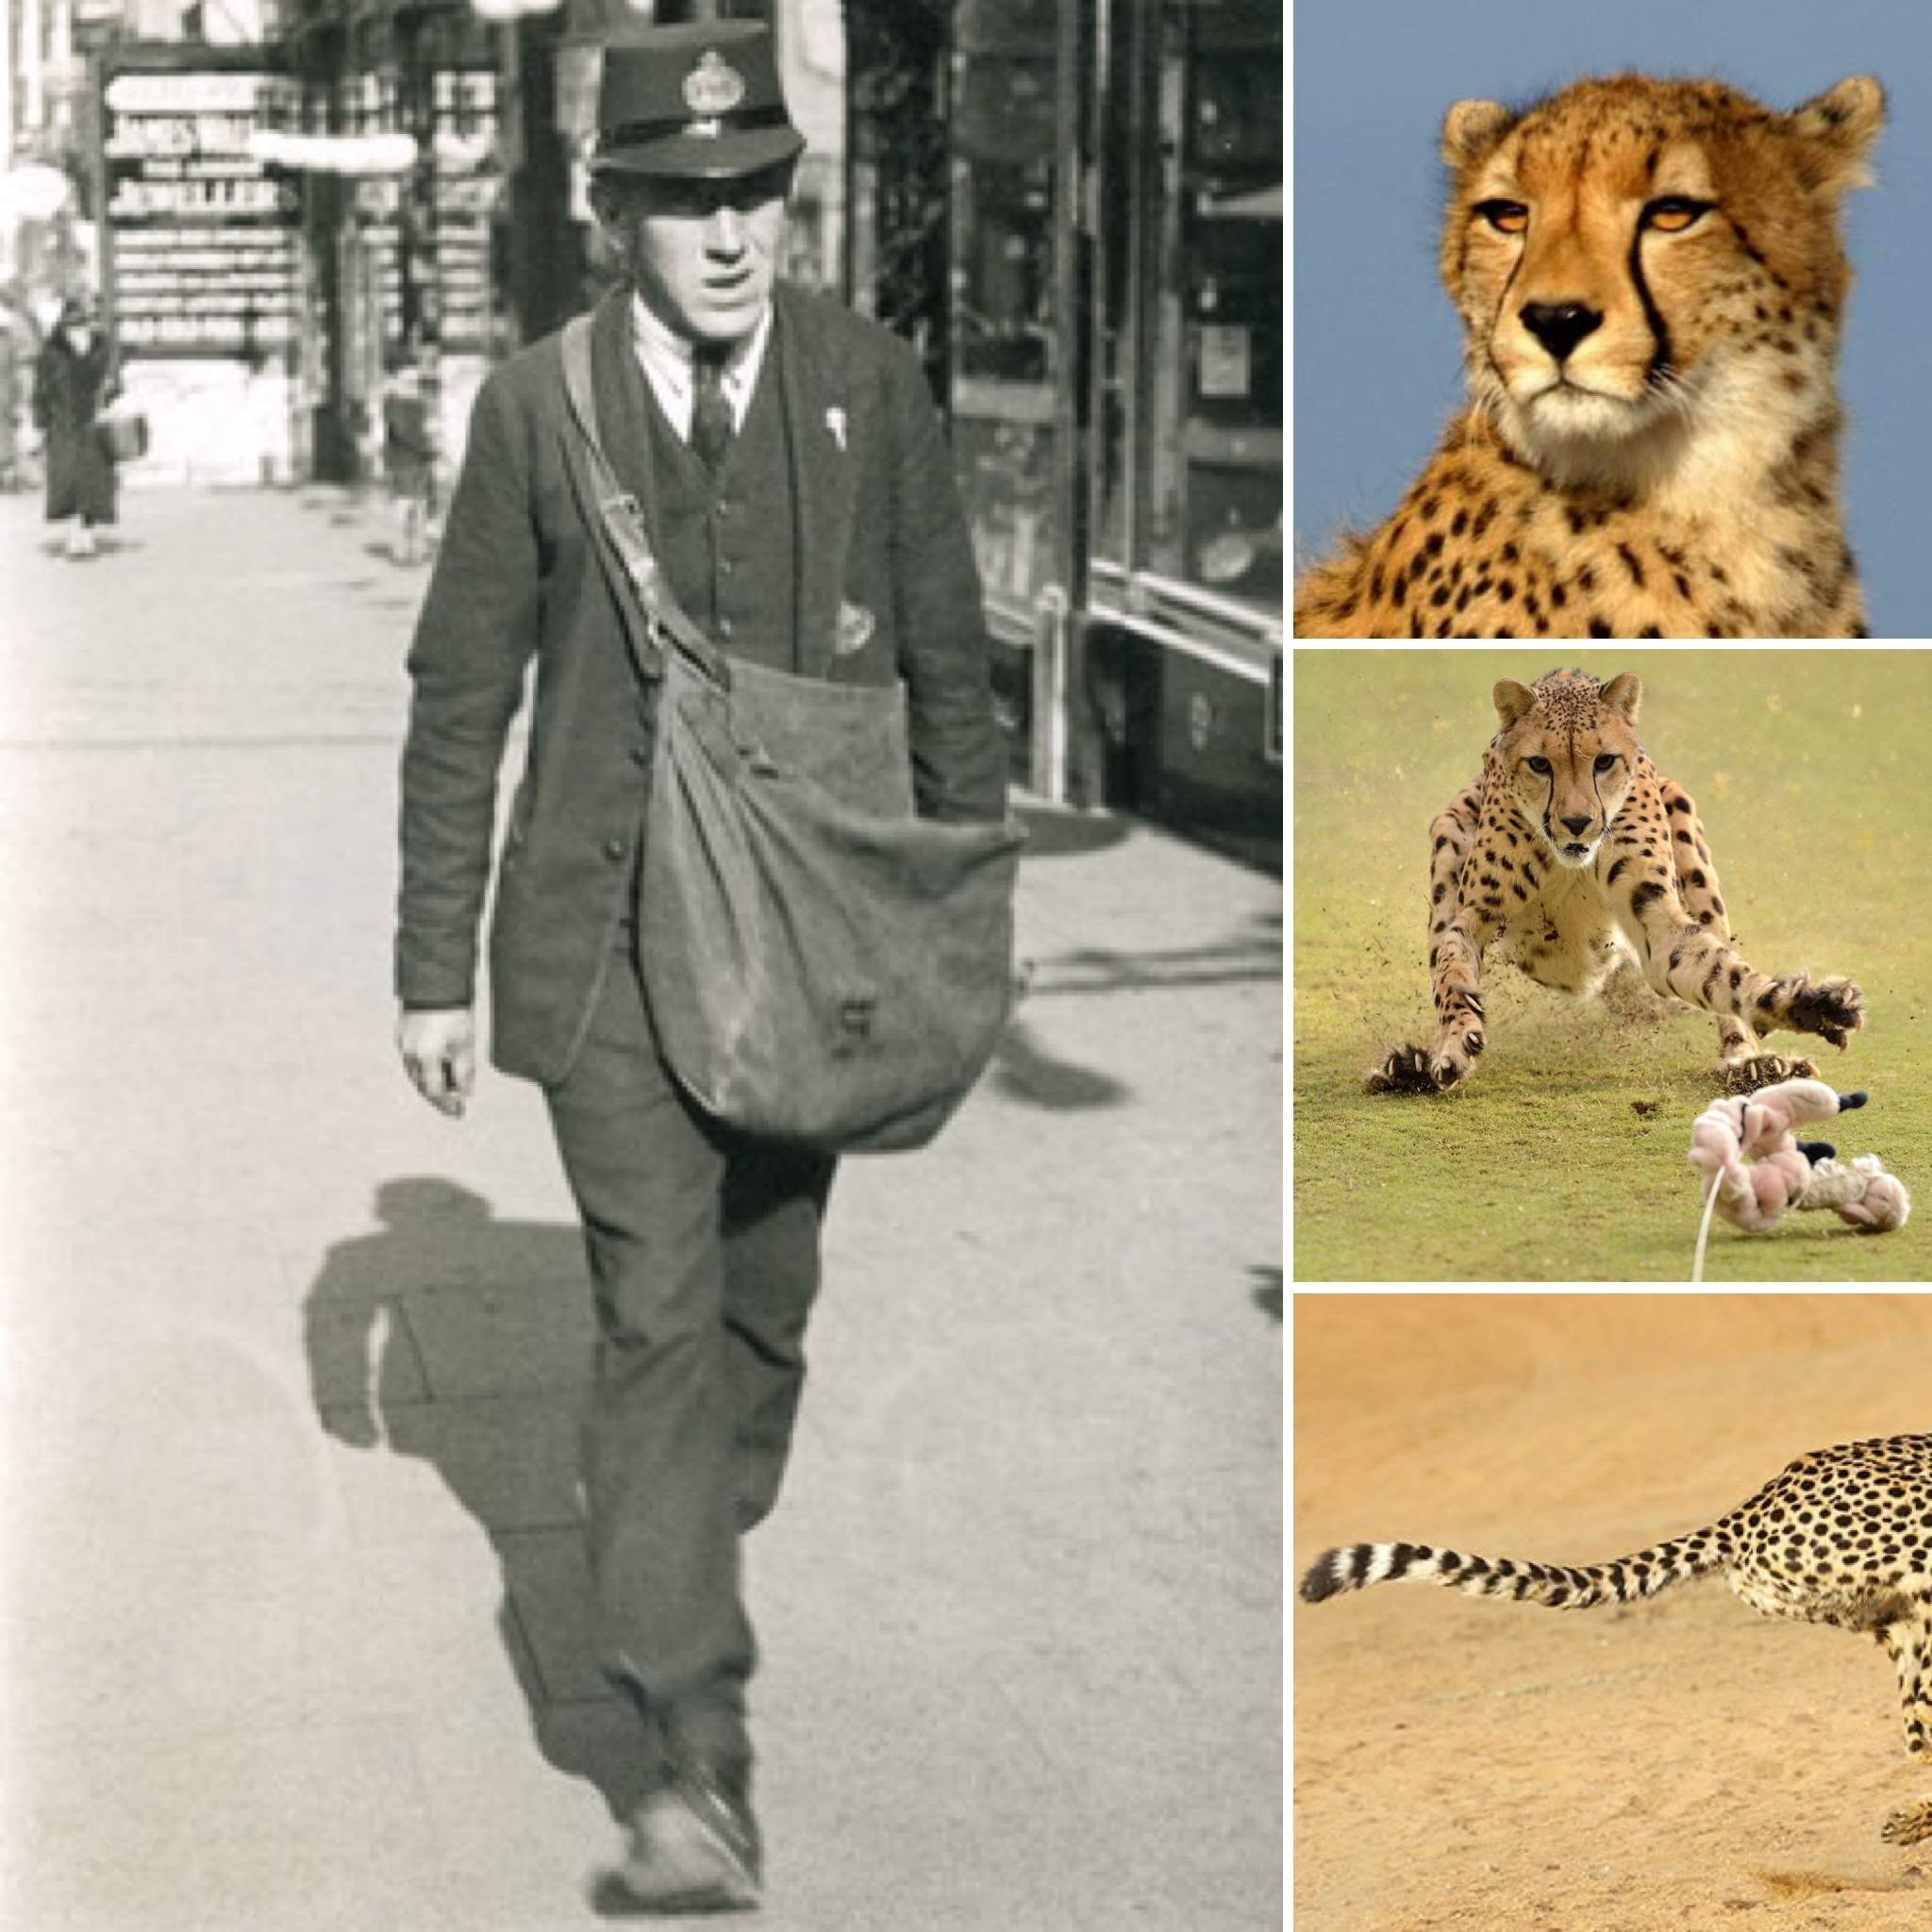 References a cheetah and a 1920 United Kingdom postman